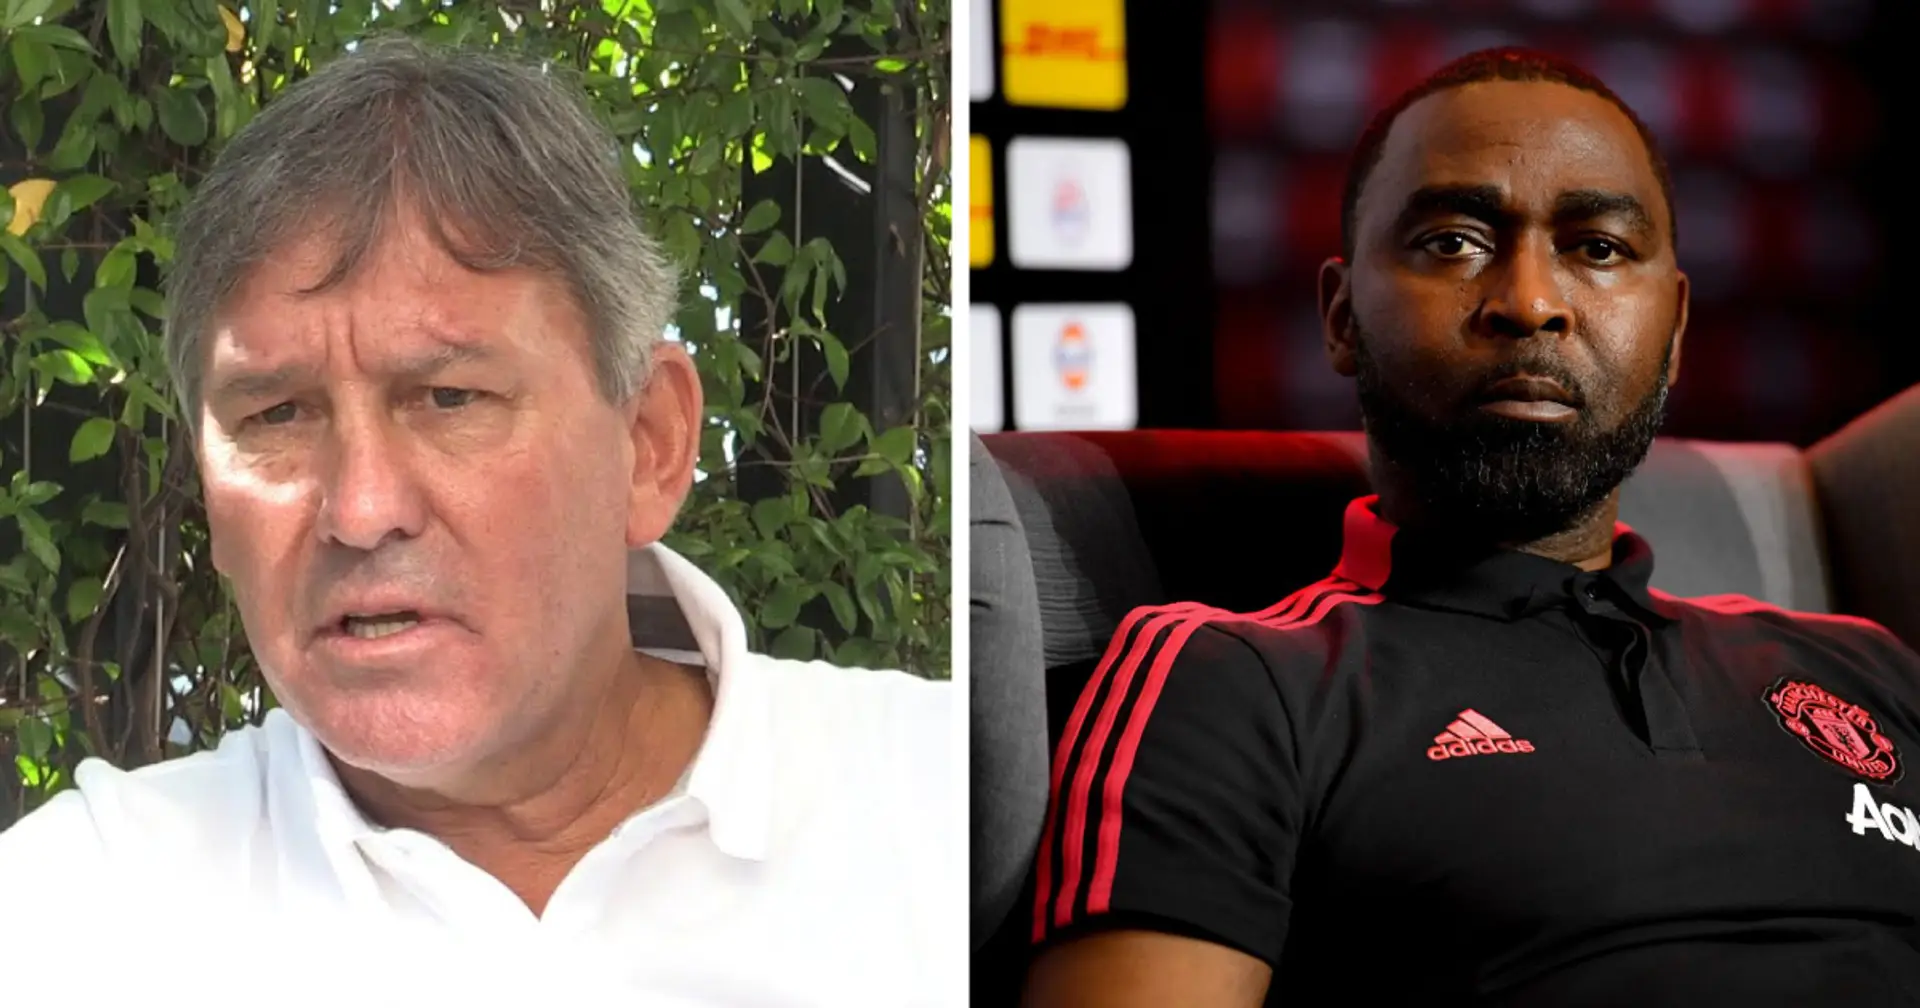 Man United legends Bryan Robson, Gary Pallister and Andy Cole reach out to elderly fans amidst lockdown